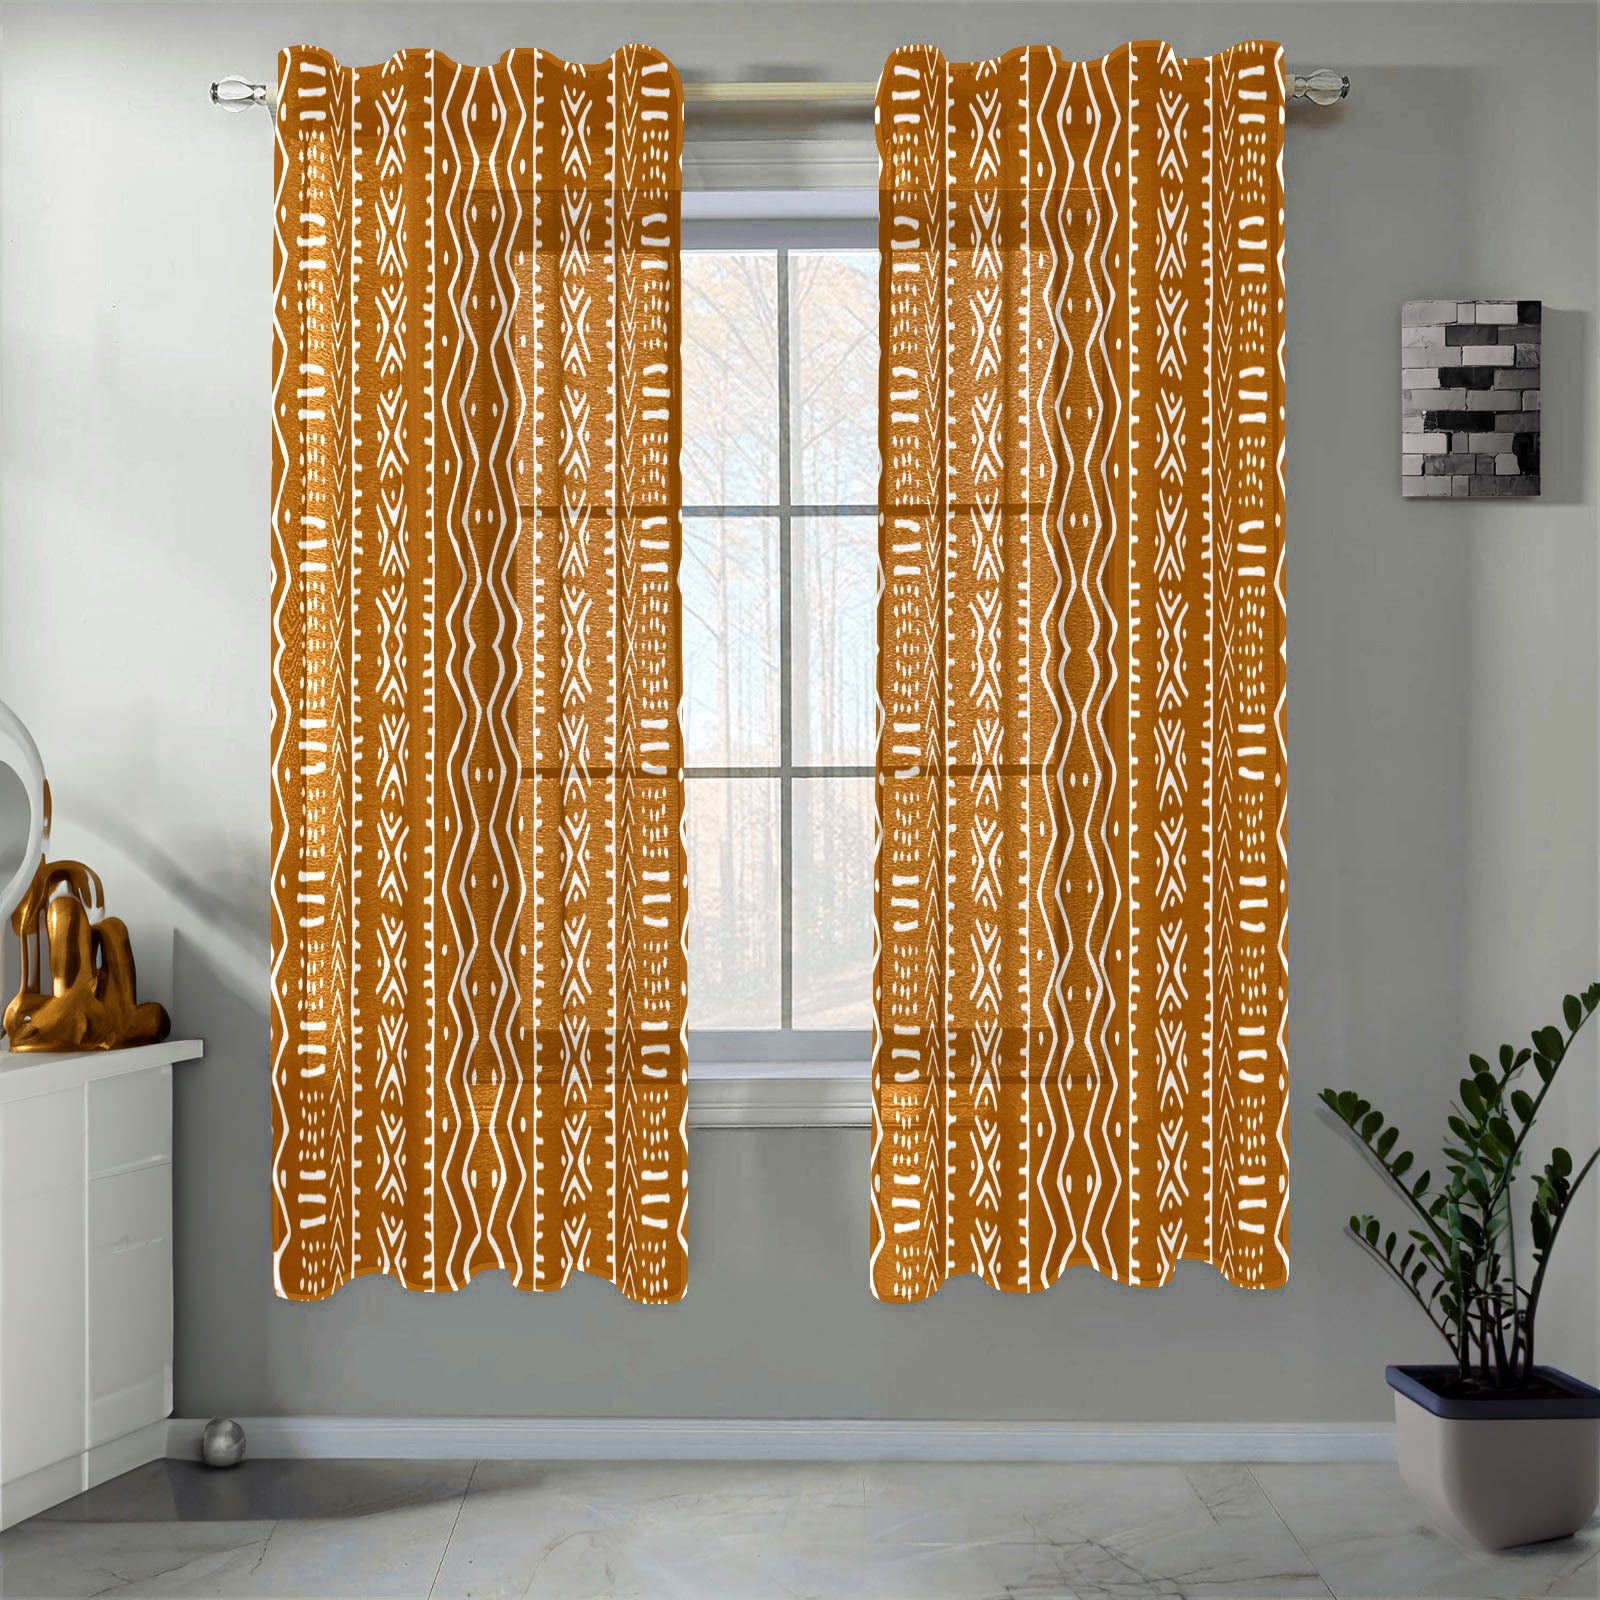 African Guaze Curtain Mudcloth Print (Two Piece)- Bynelo